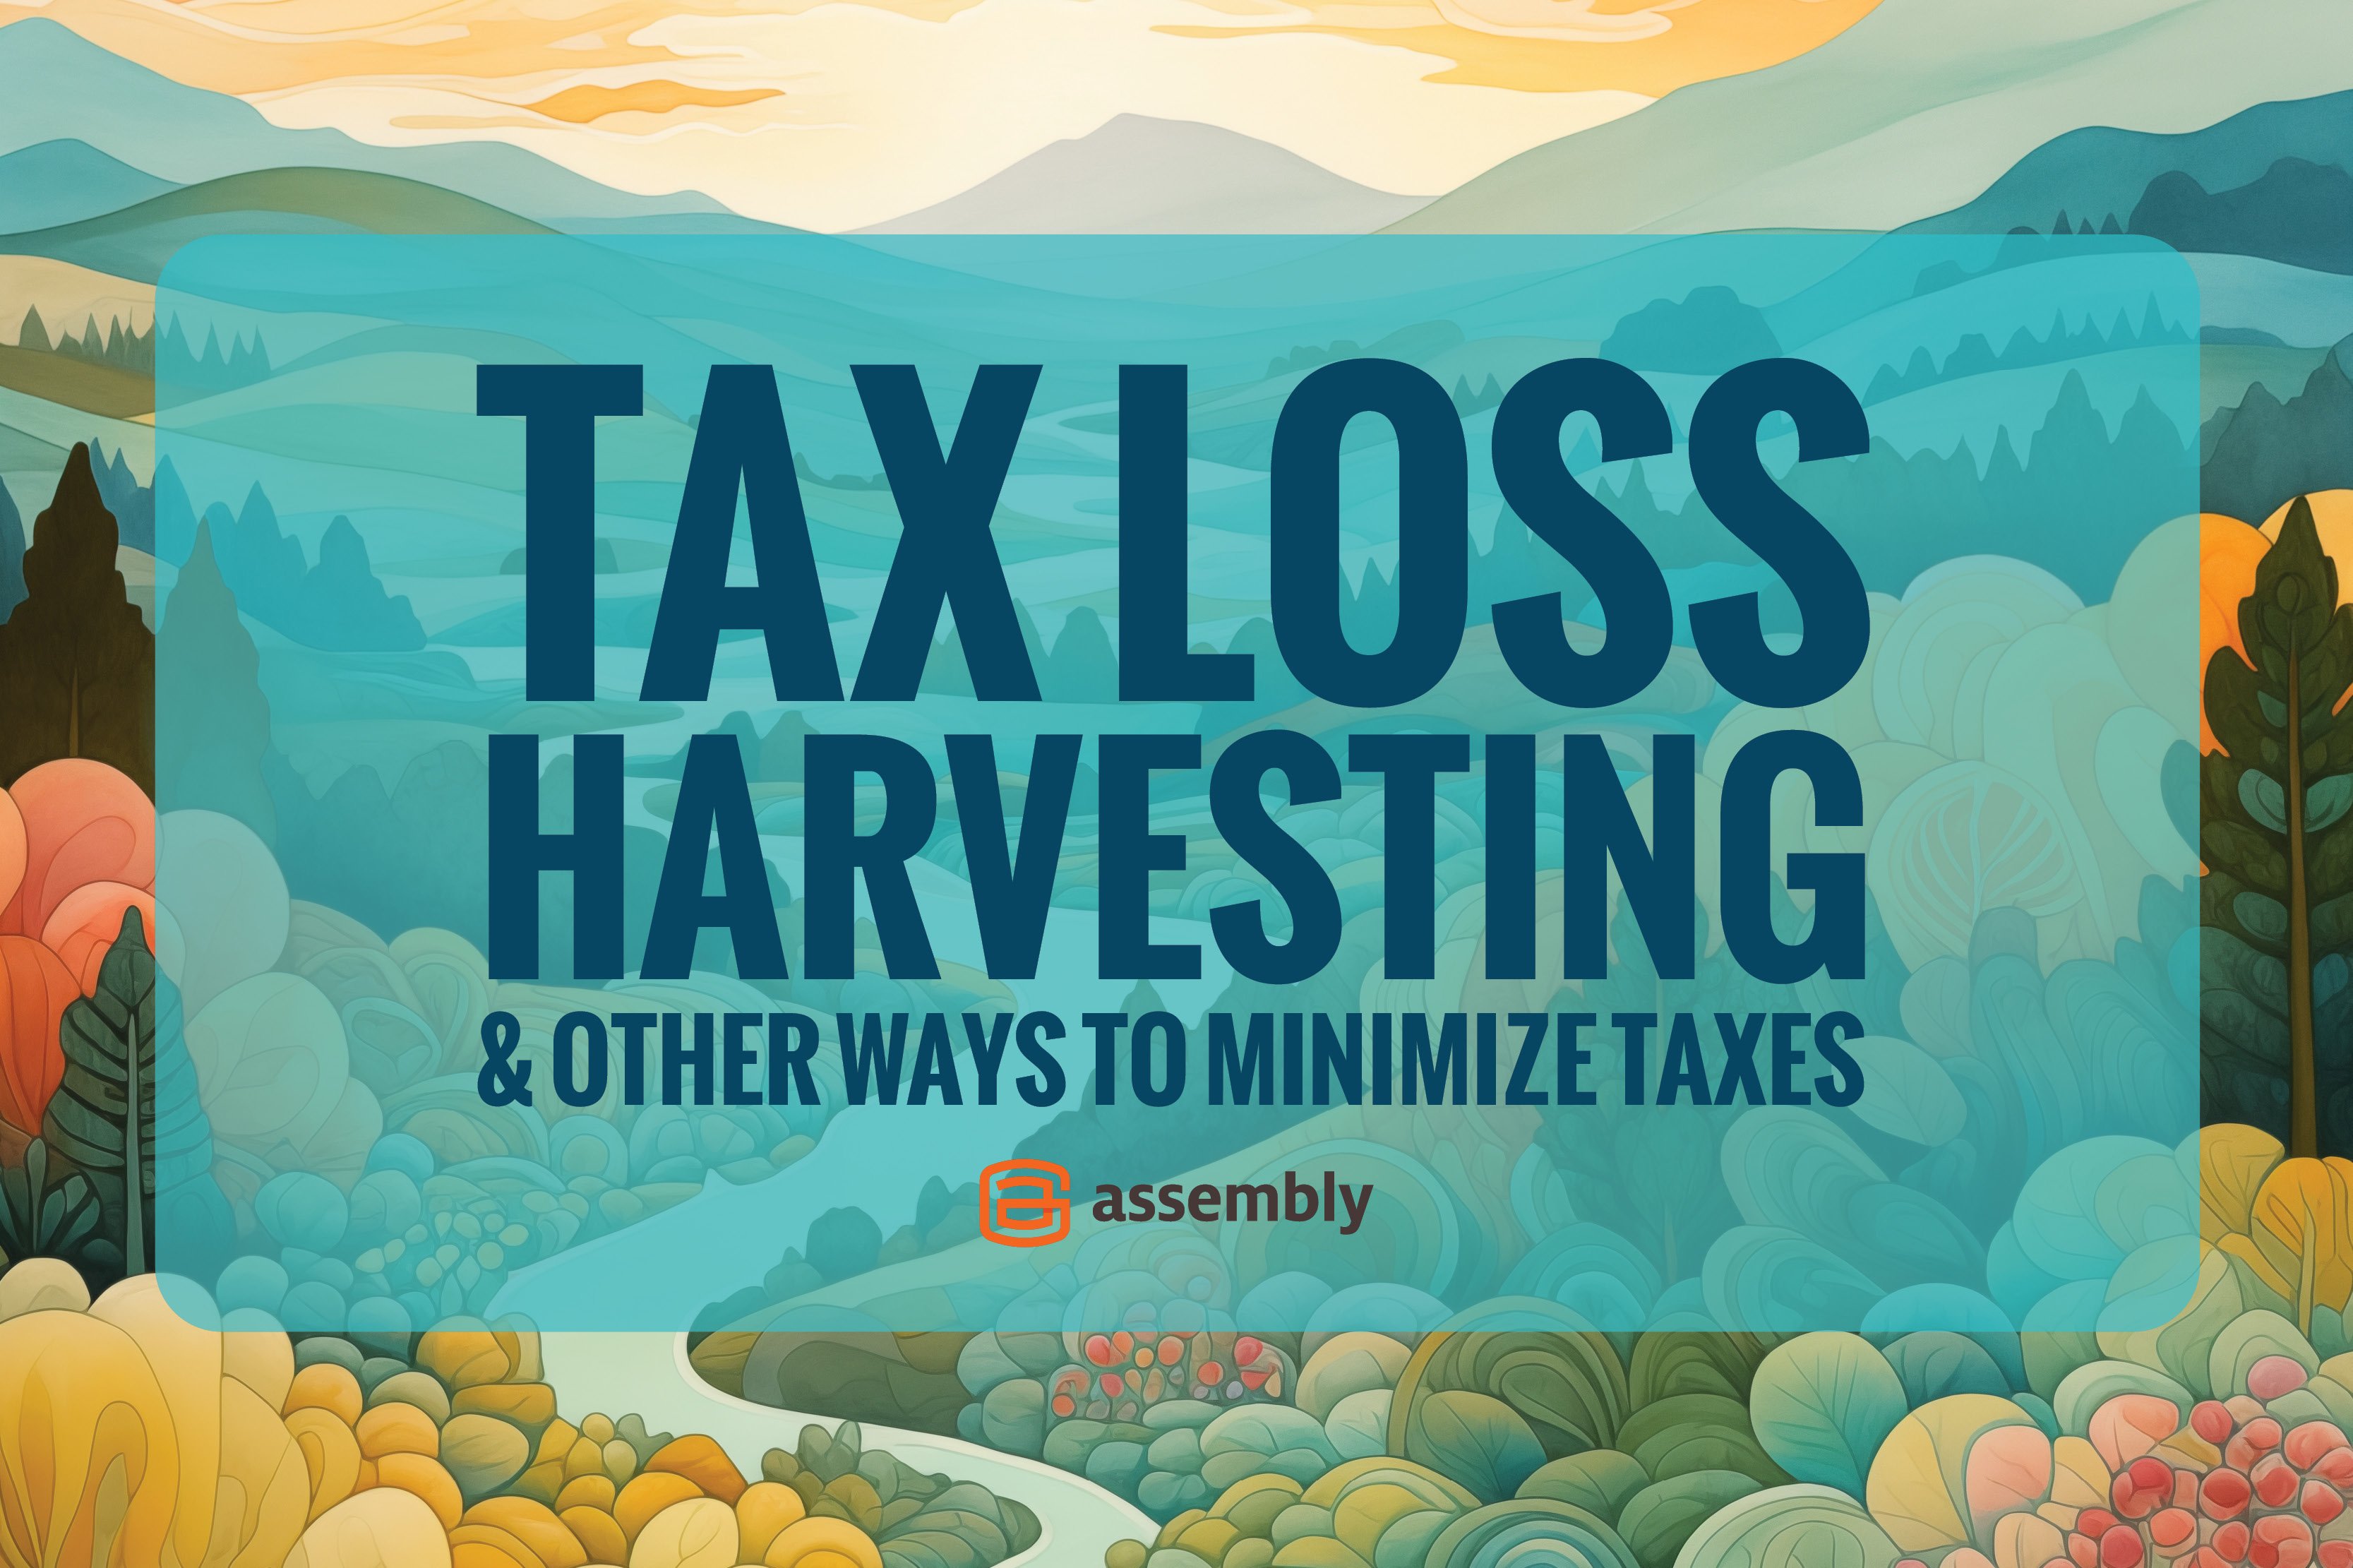 Tax Loss Harvesting and 5 Other Ways to Minimize Taxes